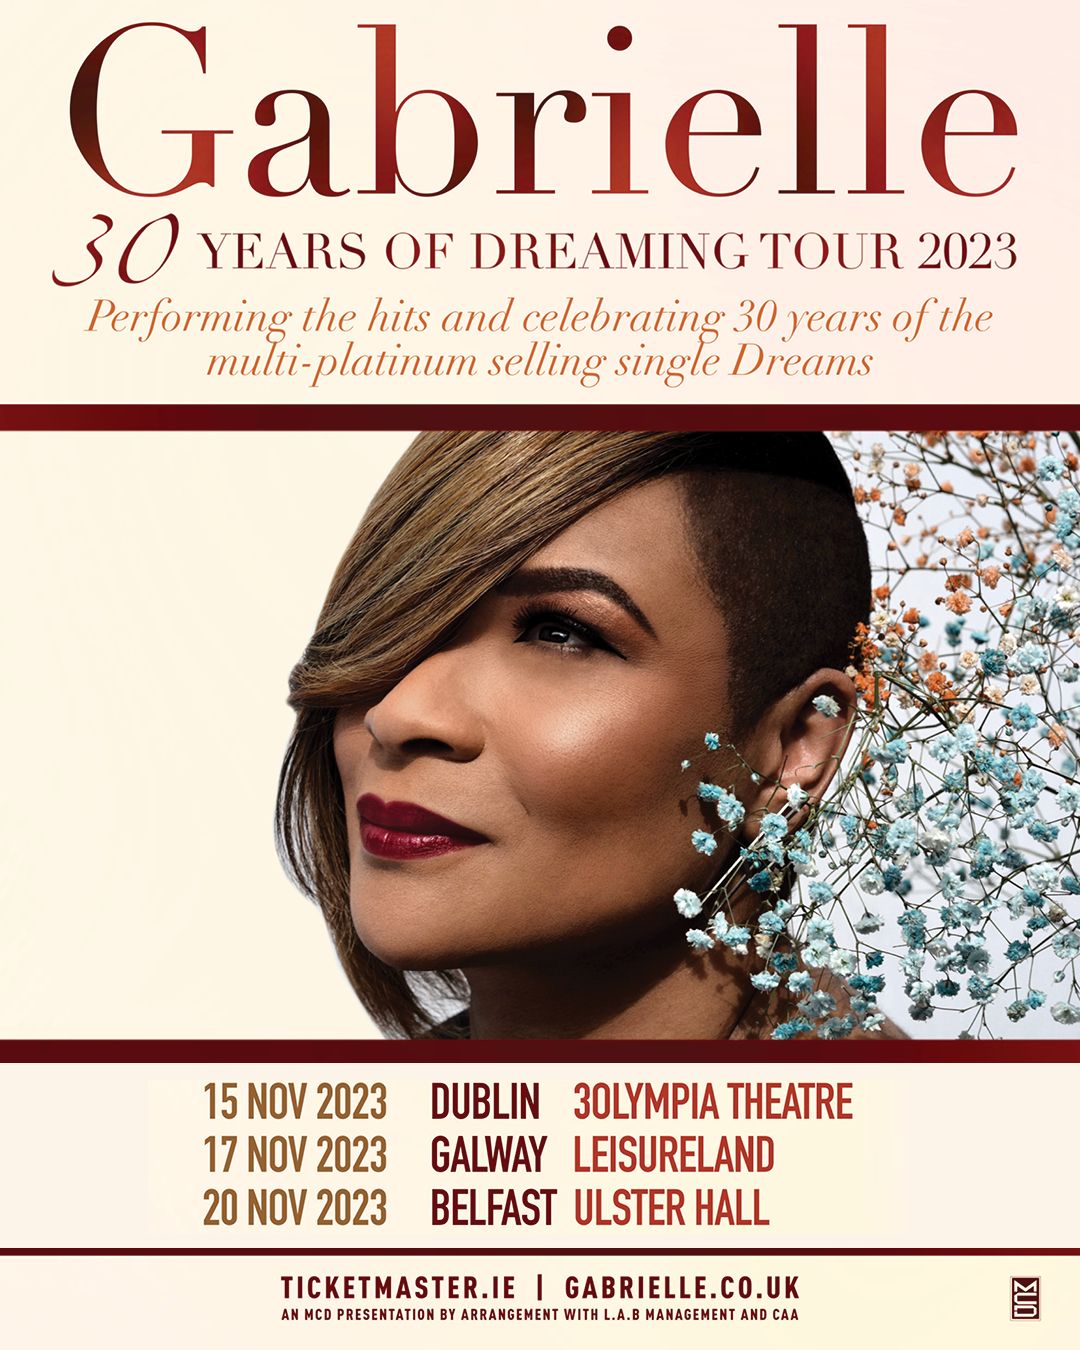 Gabrielle has confirmed three Irish concert dates as part of her 30 Years of Dreaming Tour 2023.